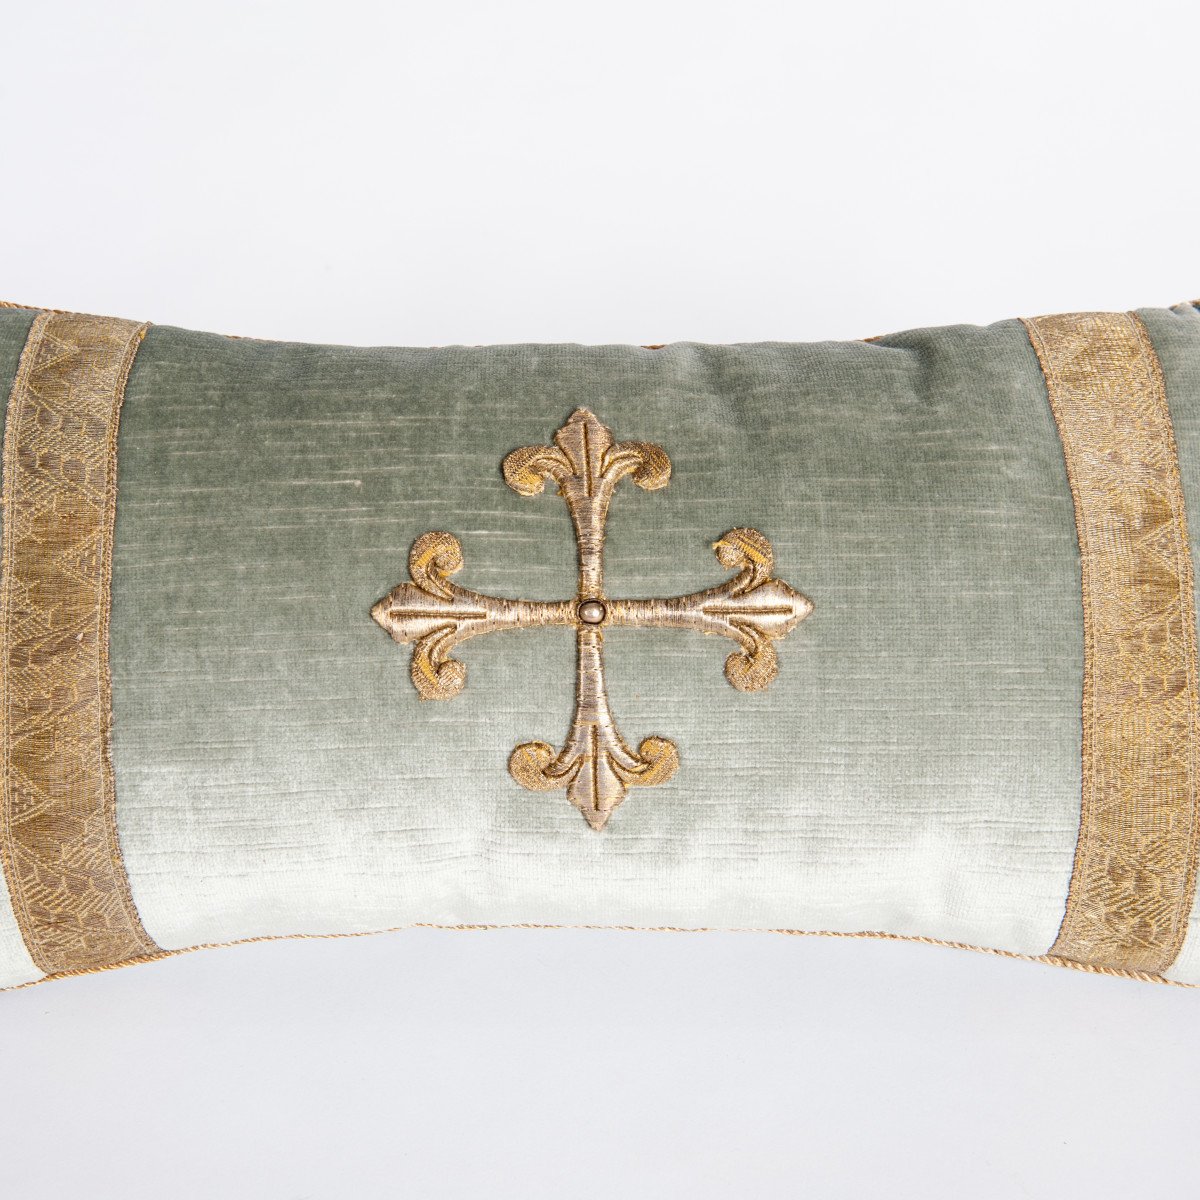 Pair Of Pastel Green Colored Velvet Pillows With Antique Metallic Embroidery -photo-4